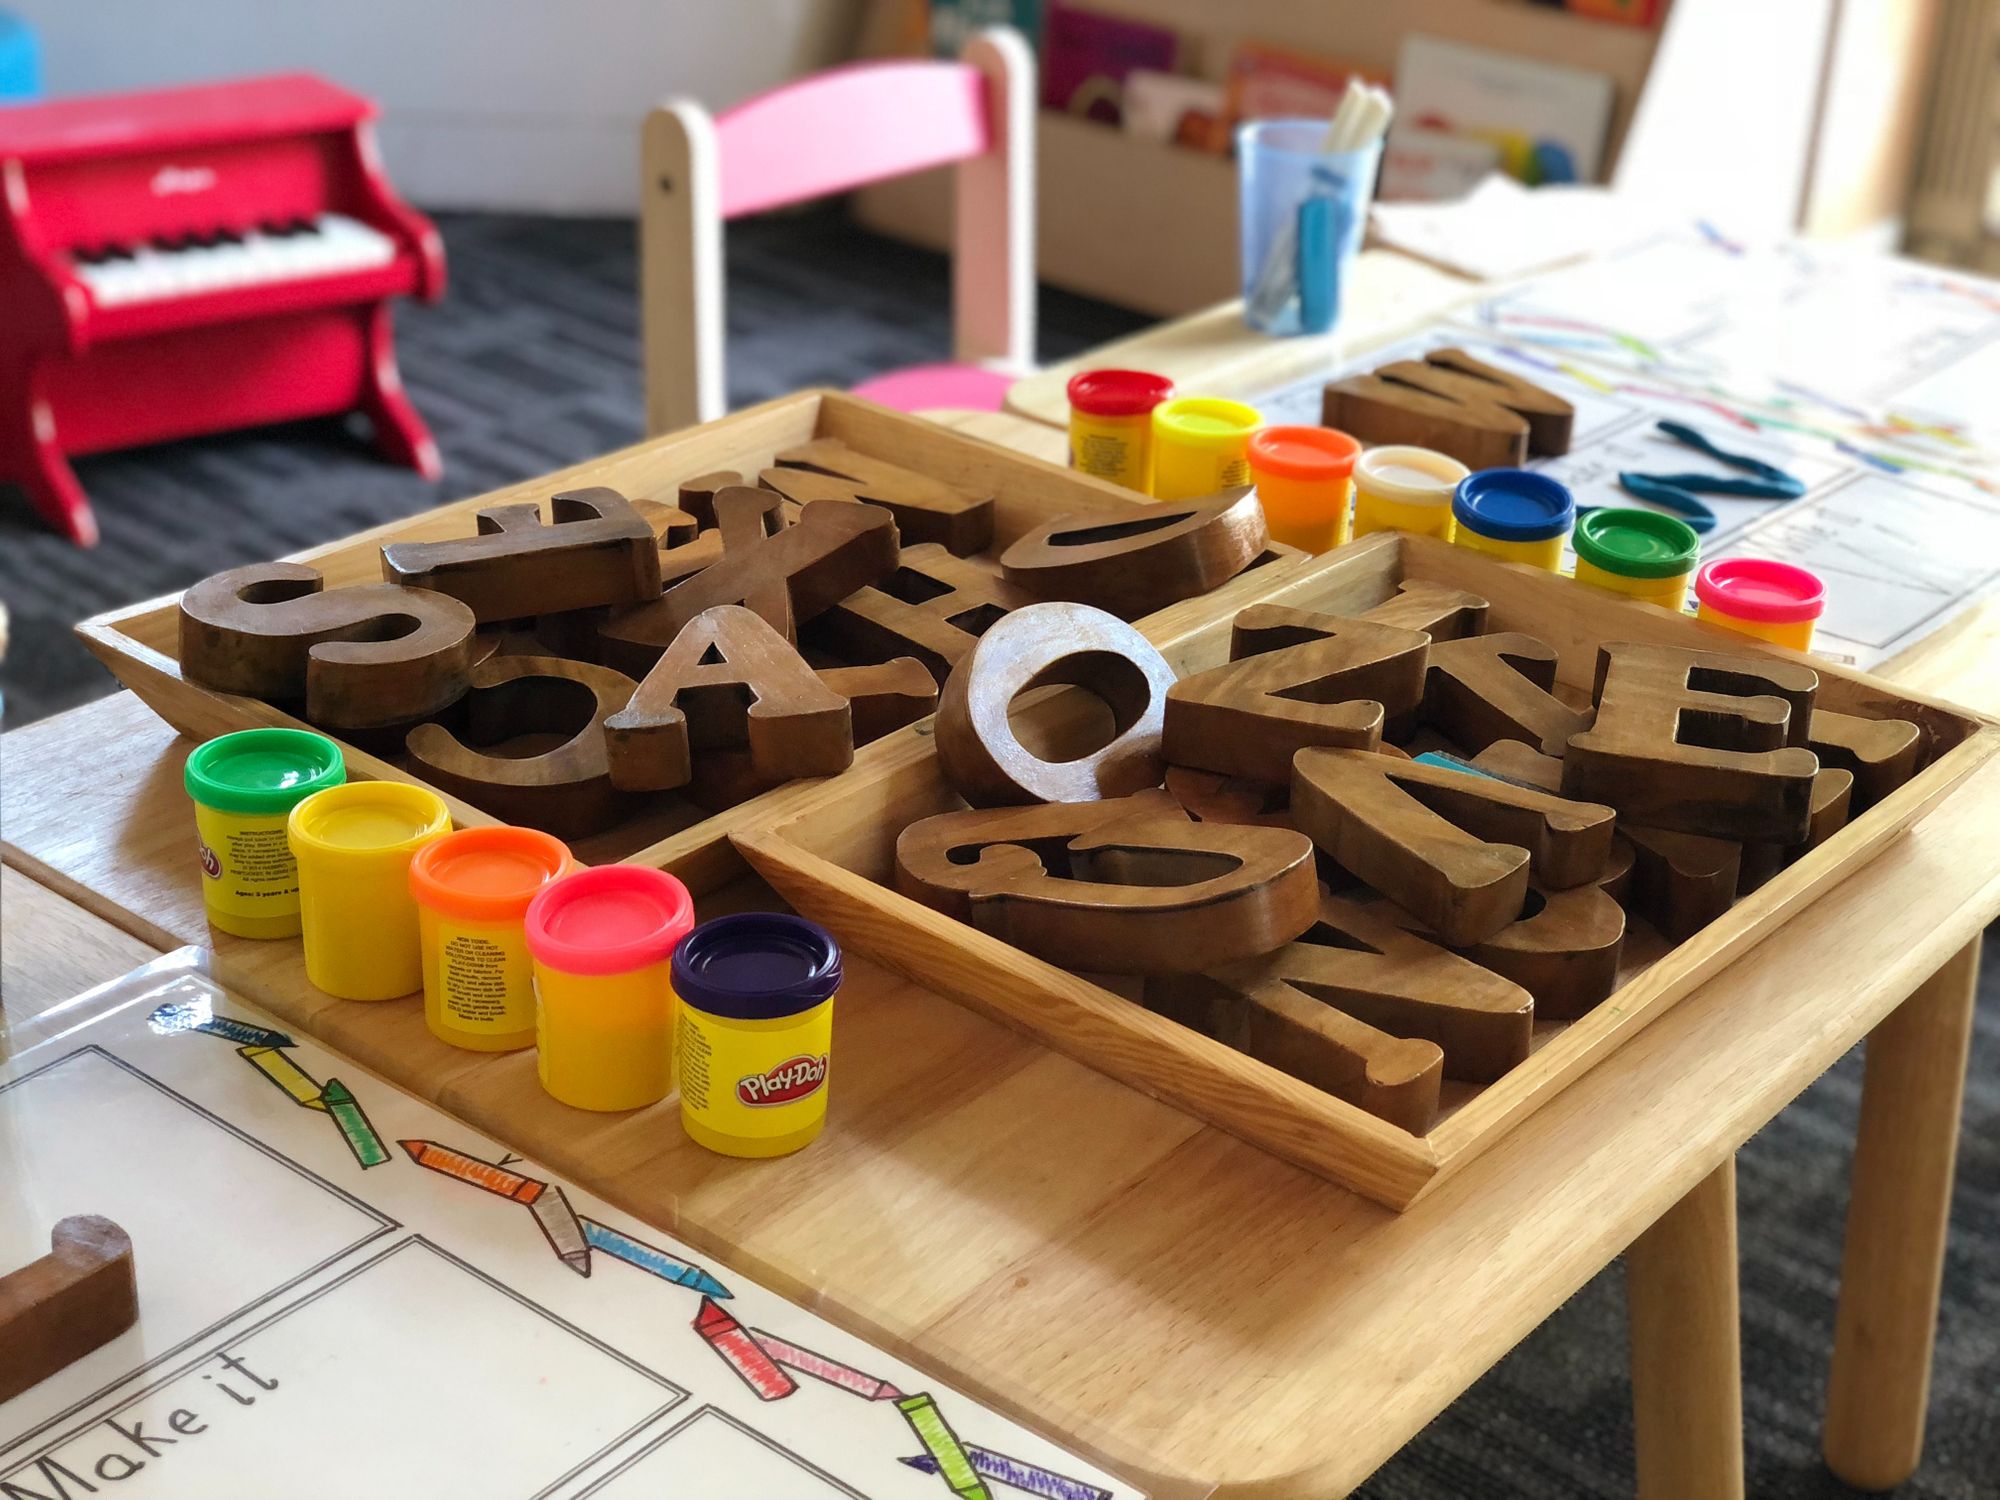 Wooden blocks of the English alphabet are placed in two trays on a table. There are canisters of Play Doh on both sides of the trays